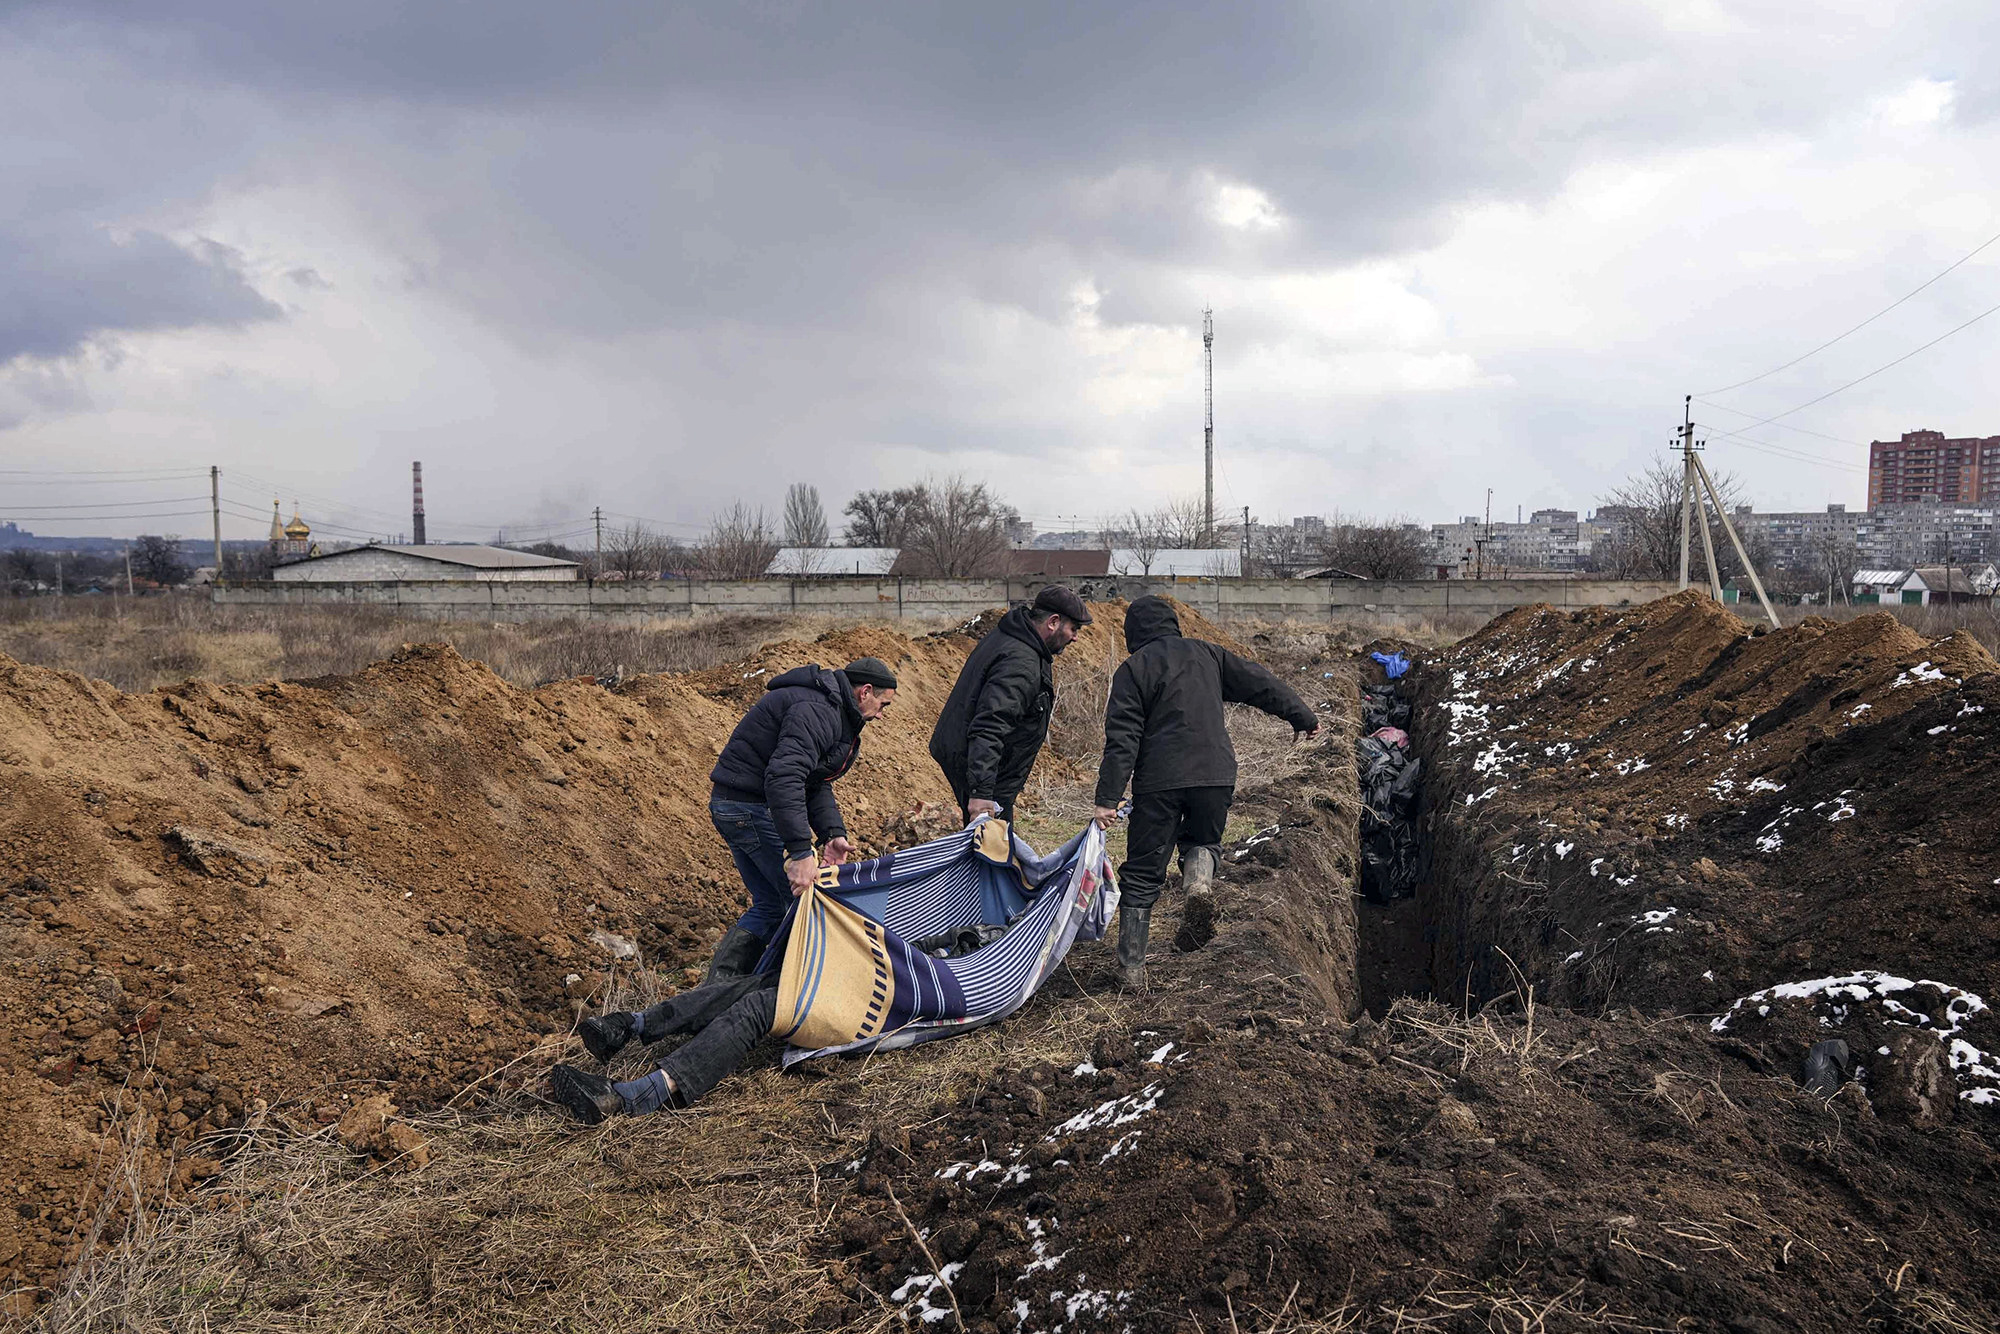 Three people carry a body in a blanket along a path toward a steep hole in the ground